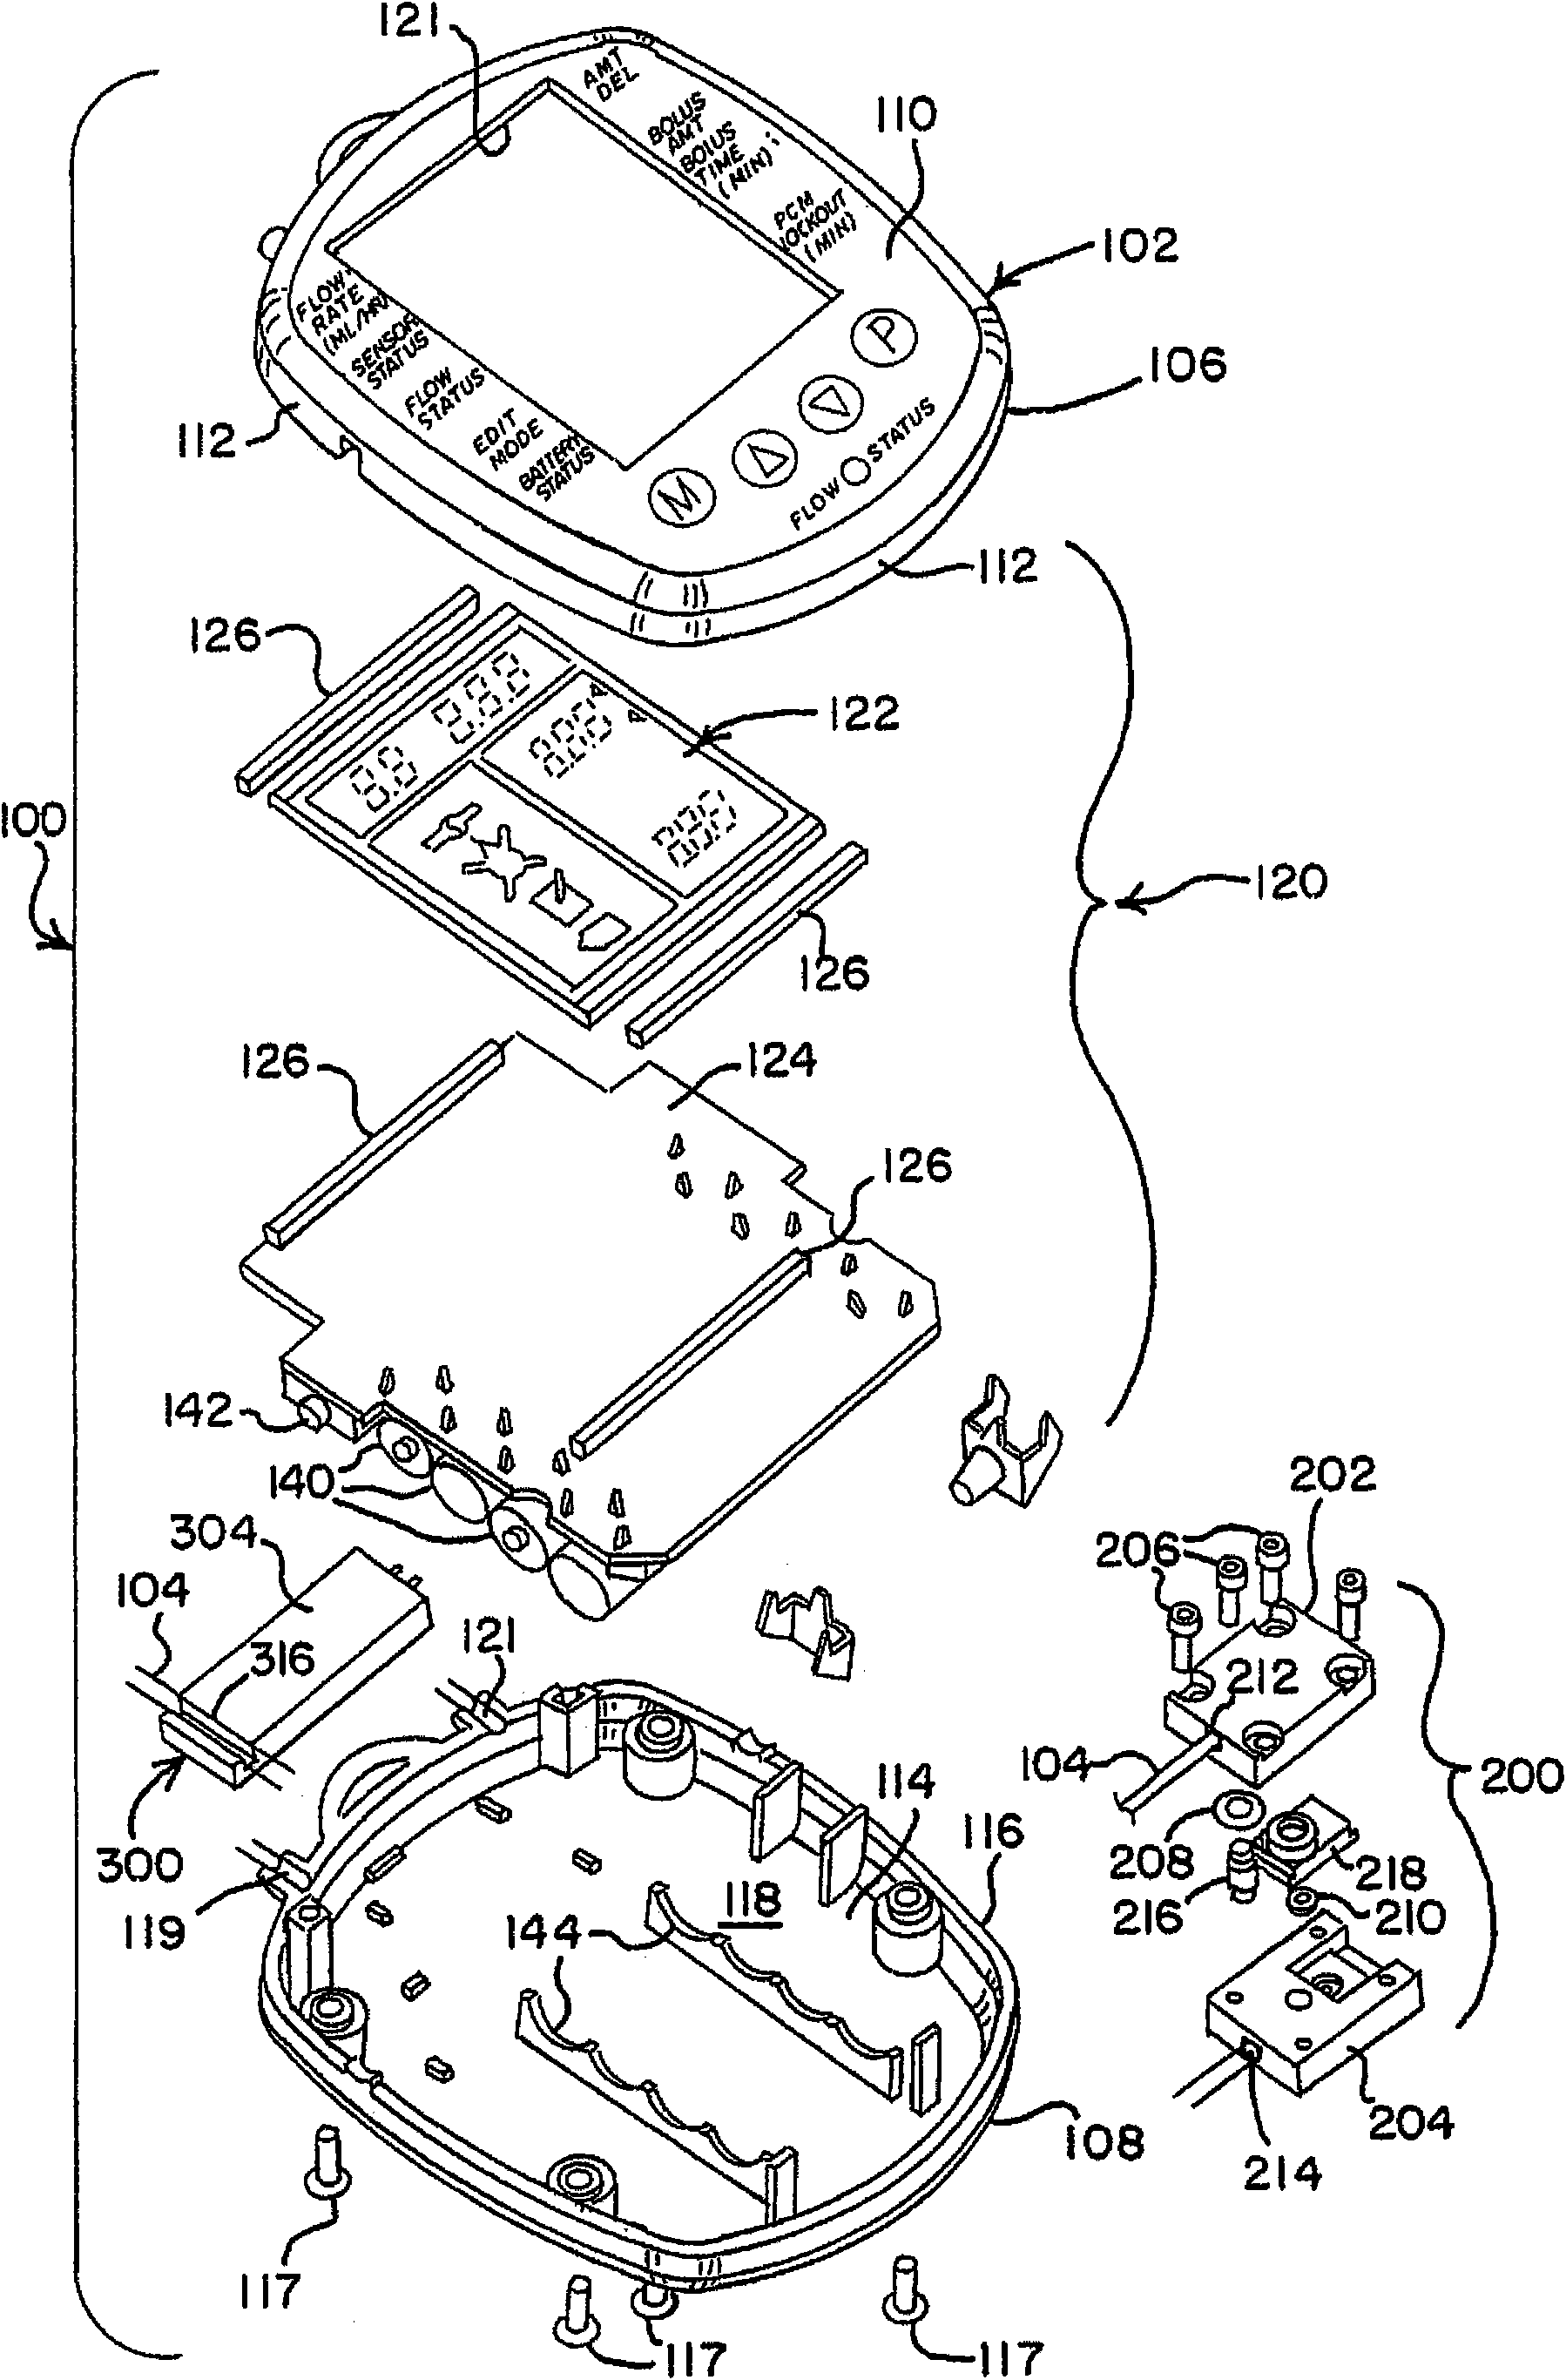 Apparatus for a fluid delivery system with controlled fluid flow rate